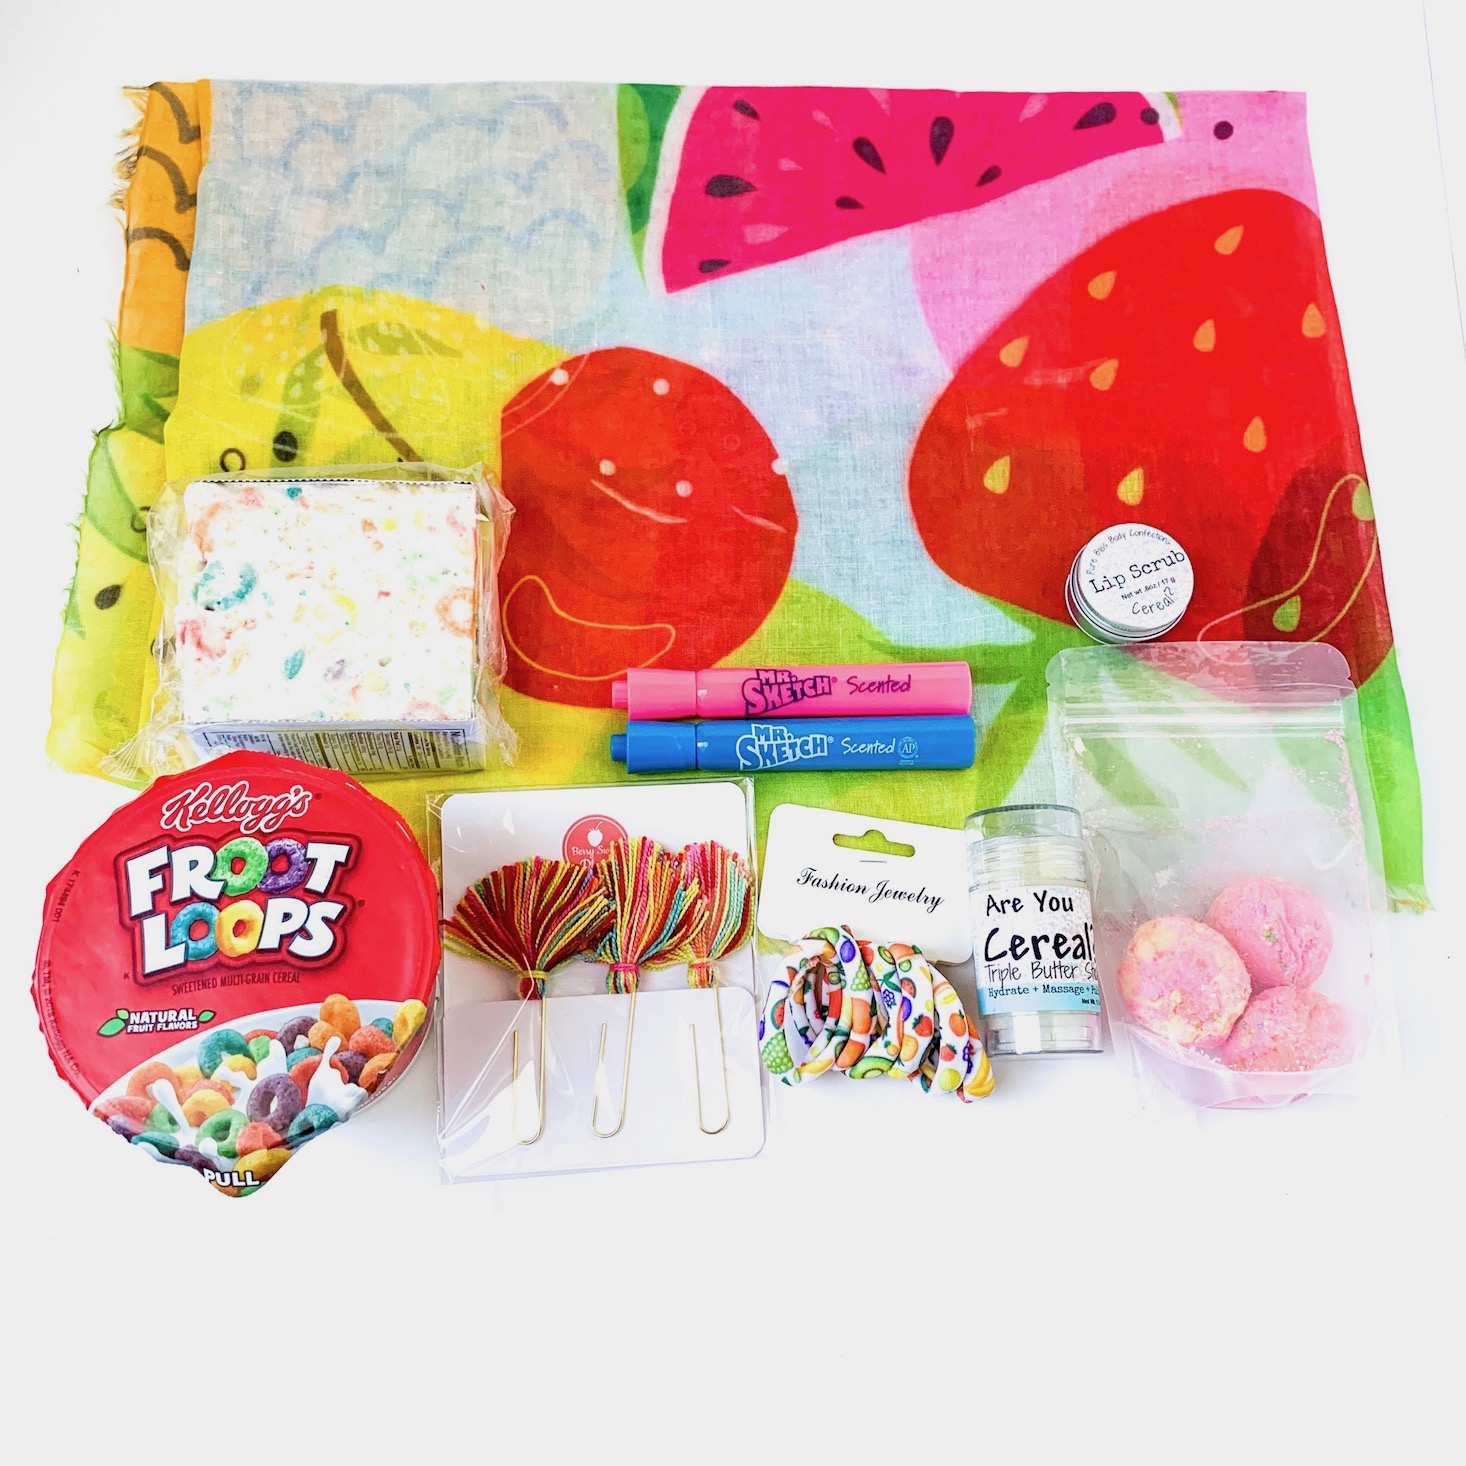 Fruit For Thought Gift Box Review + Coupon – April 2019